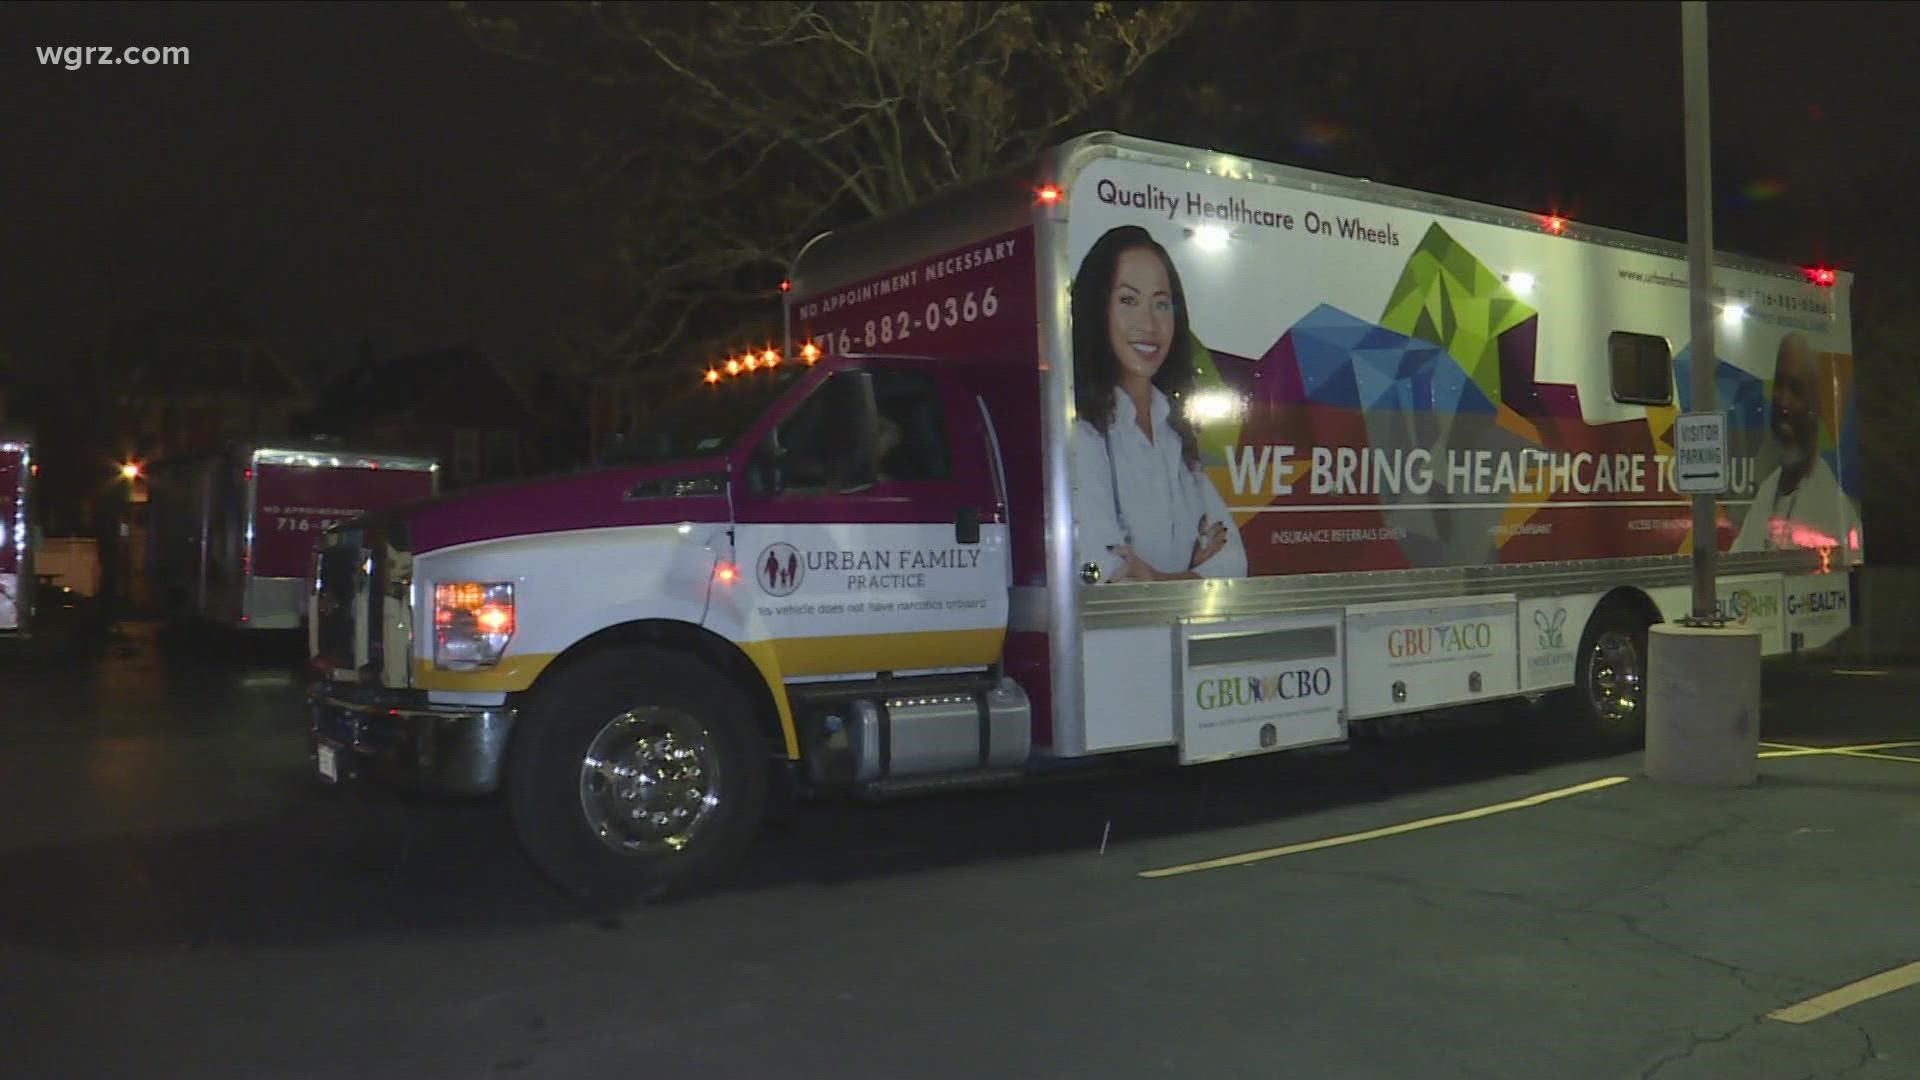 Dr. Raul Vazquez is redefining community medicine with the addition of three new mobile clinics that will help provide equitable healthcare to those in need.